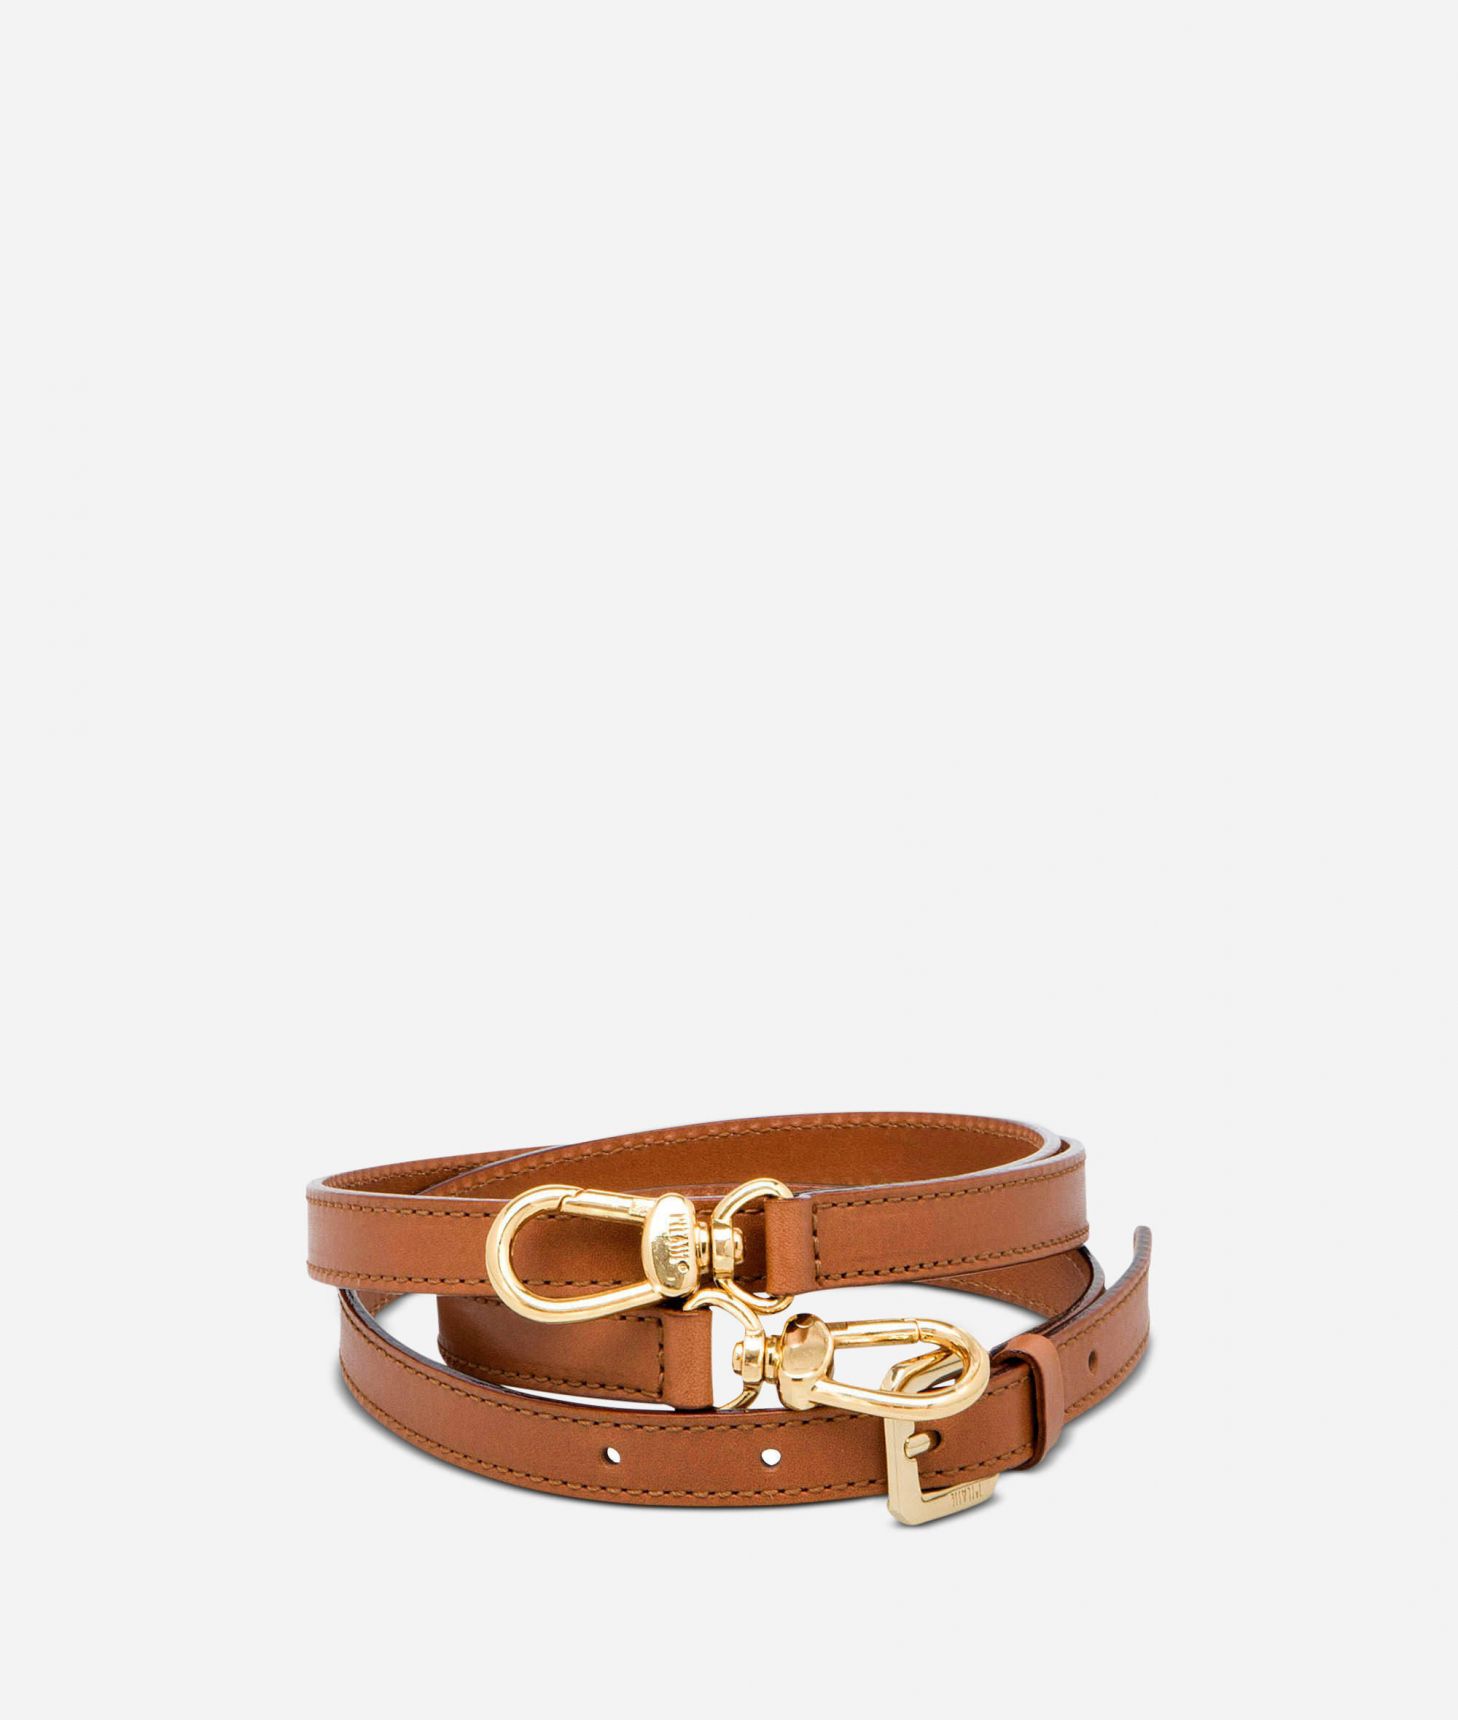 Adjustable strap in tan leather,front